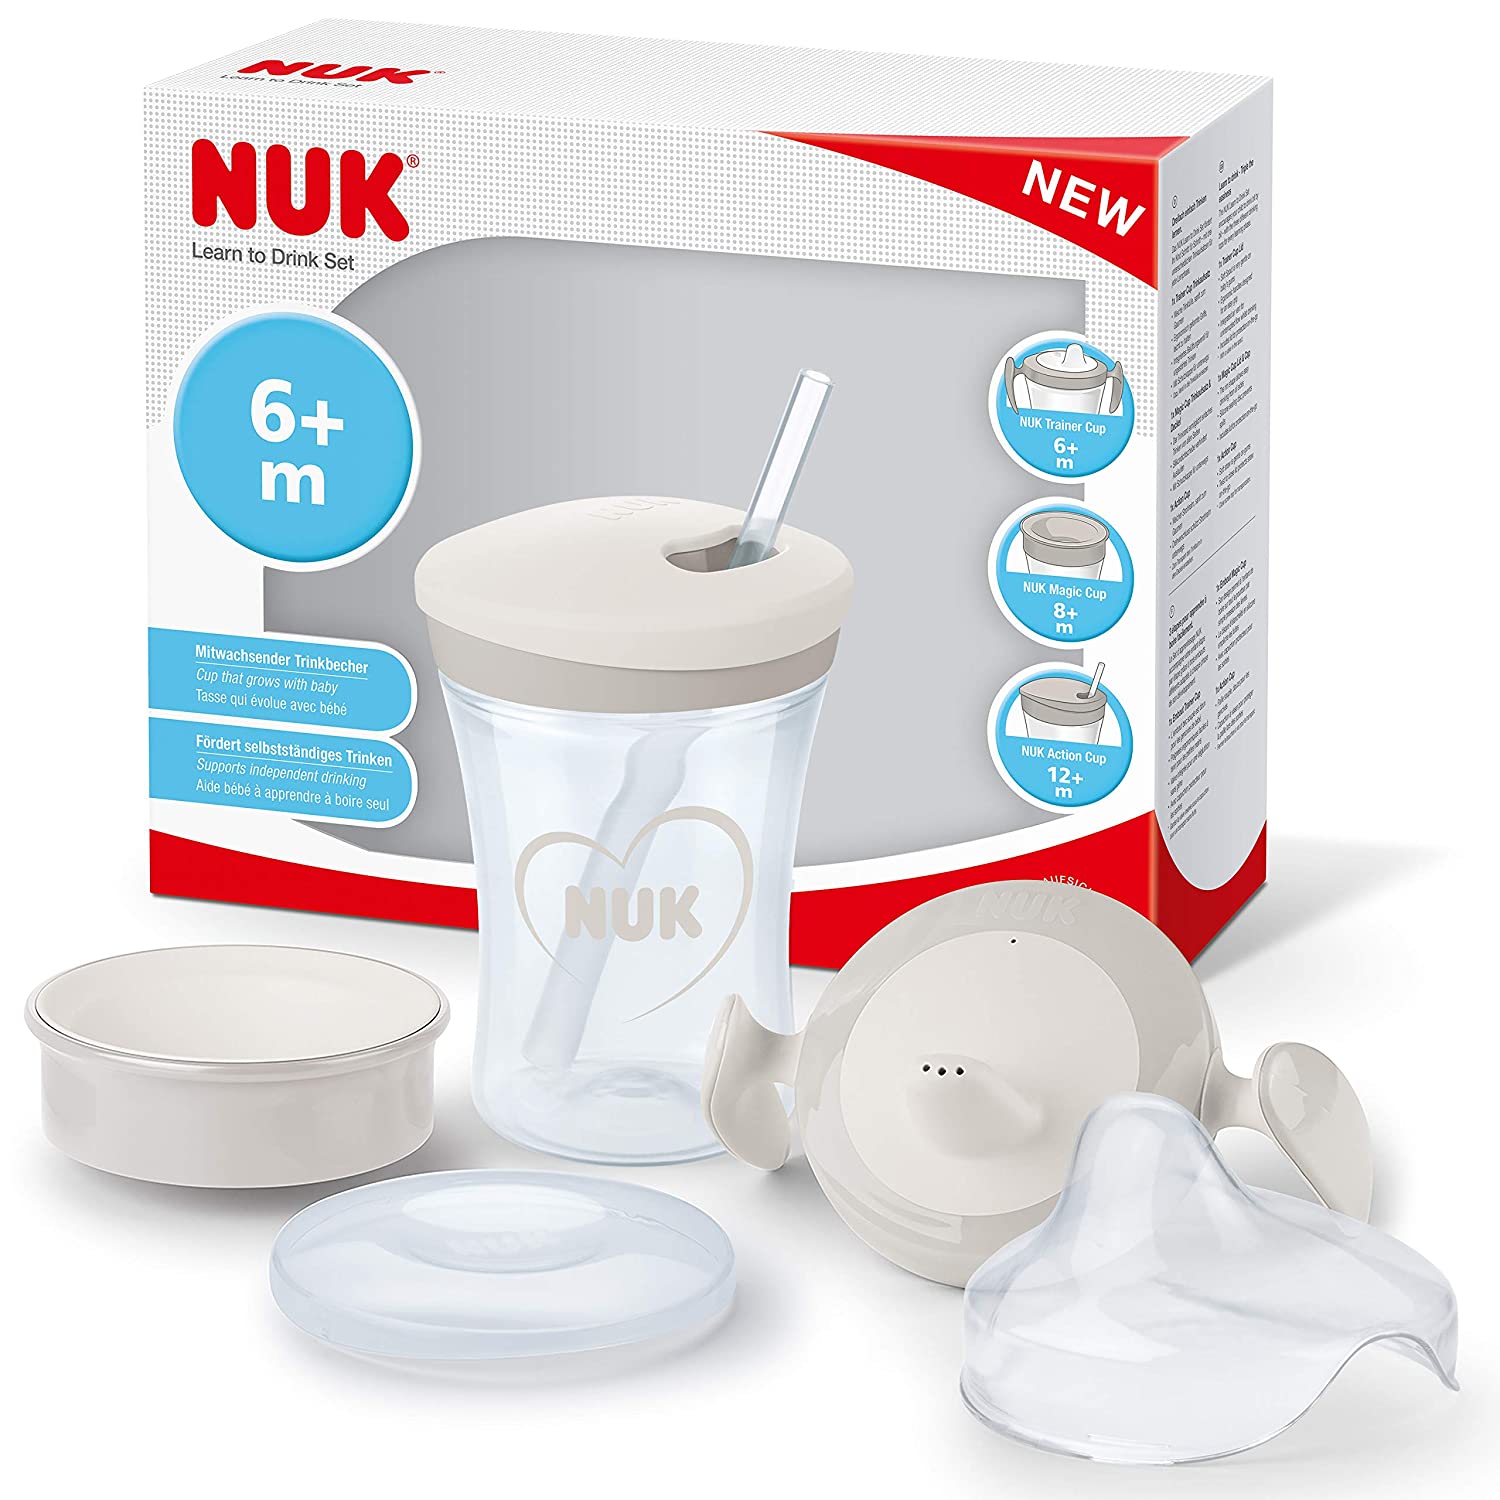 NUK 3-in-1 Drinking Set with Trainer Cup Trainer Cup Sippy Cup (6+ Months), Magic Cup 360° Drinking Cup (8+ M) & Action Cup Learning Bottle (12+ M) | 230 ml | BPA-Free | Heart (Neutral)